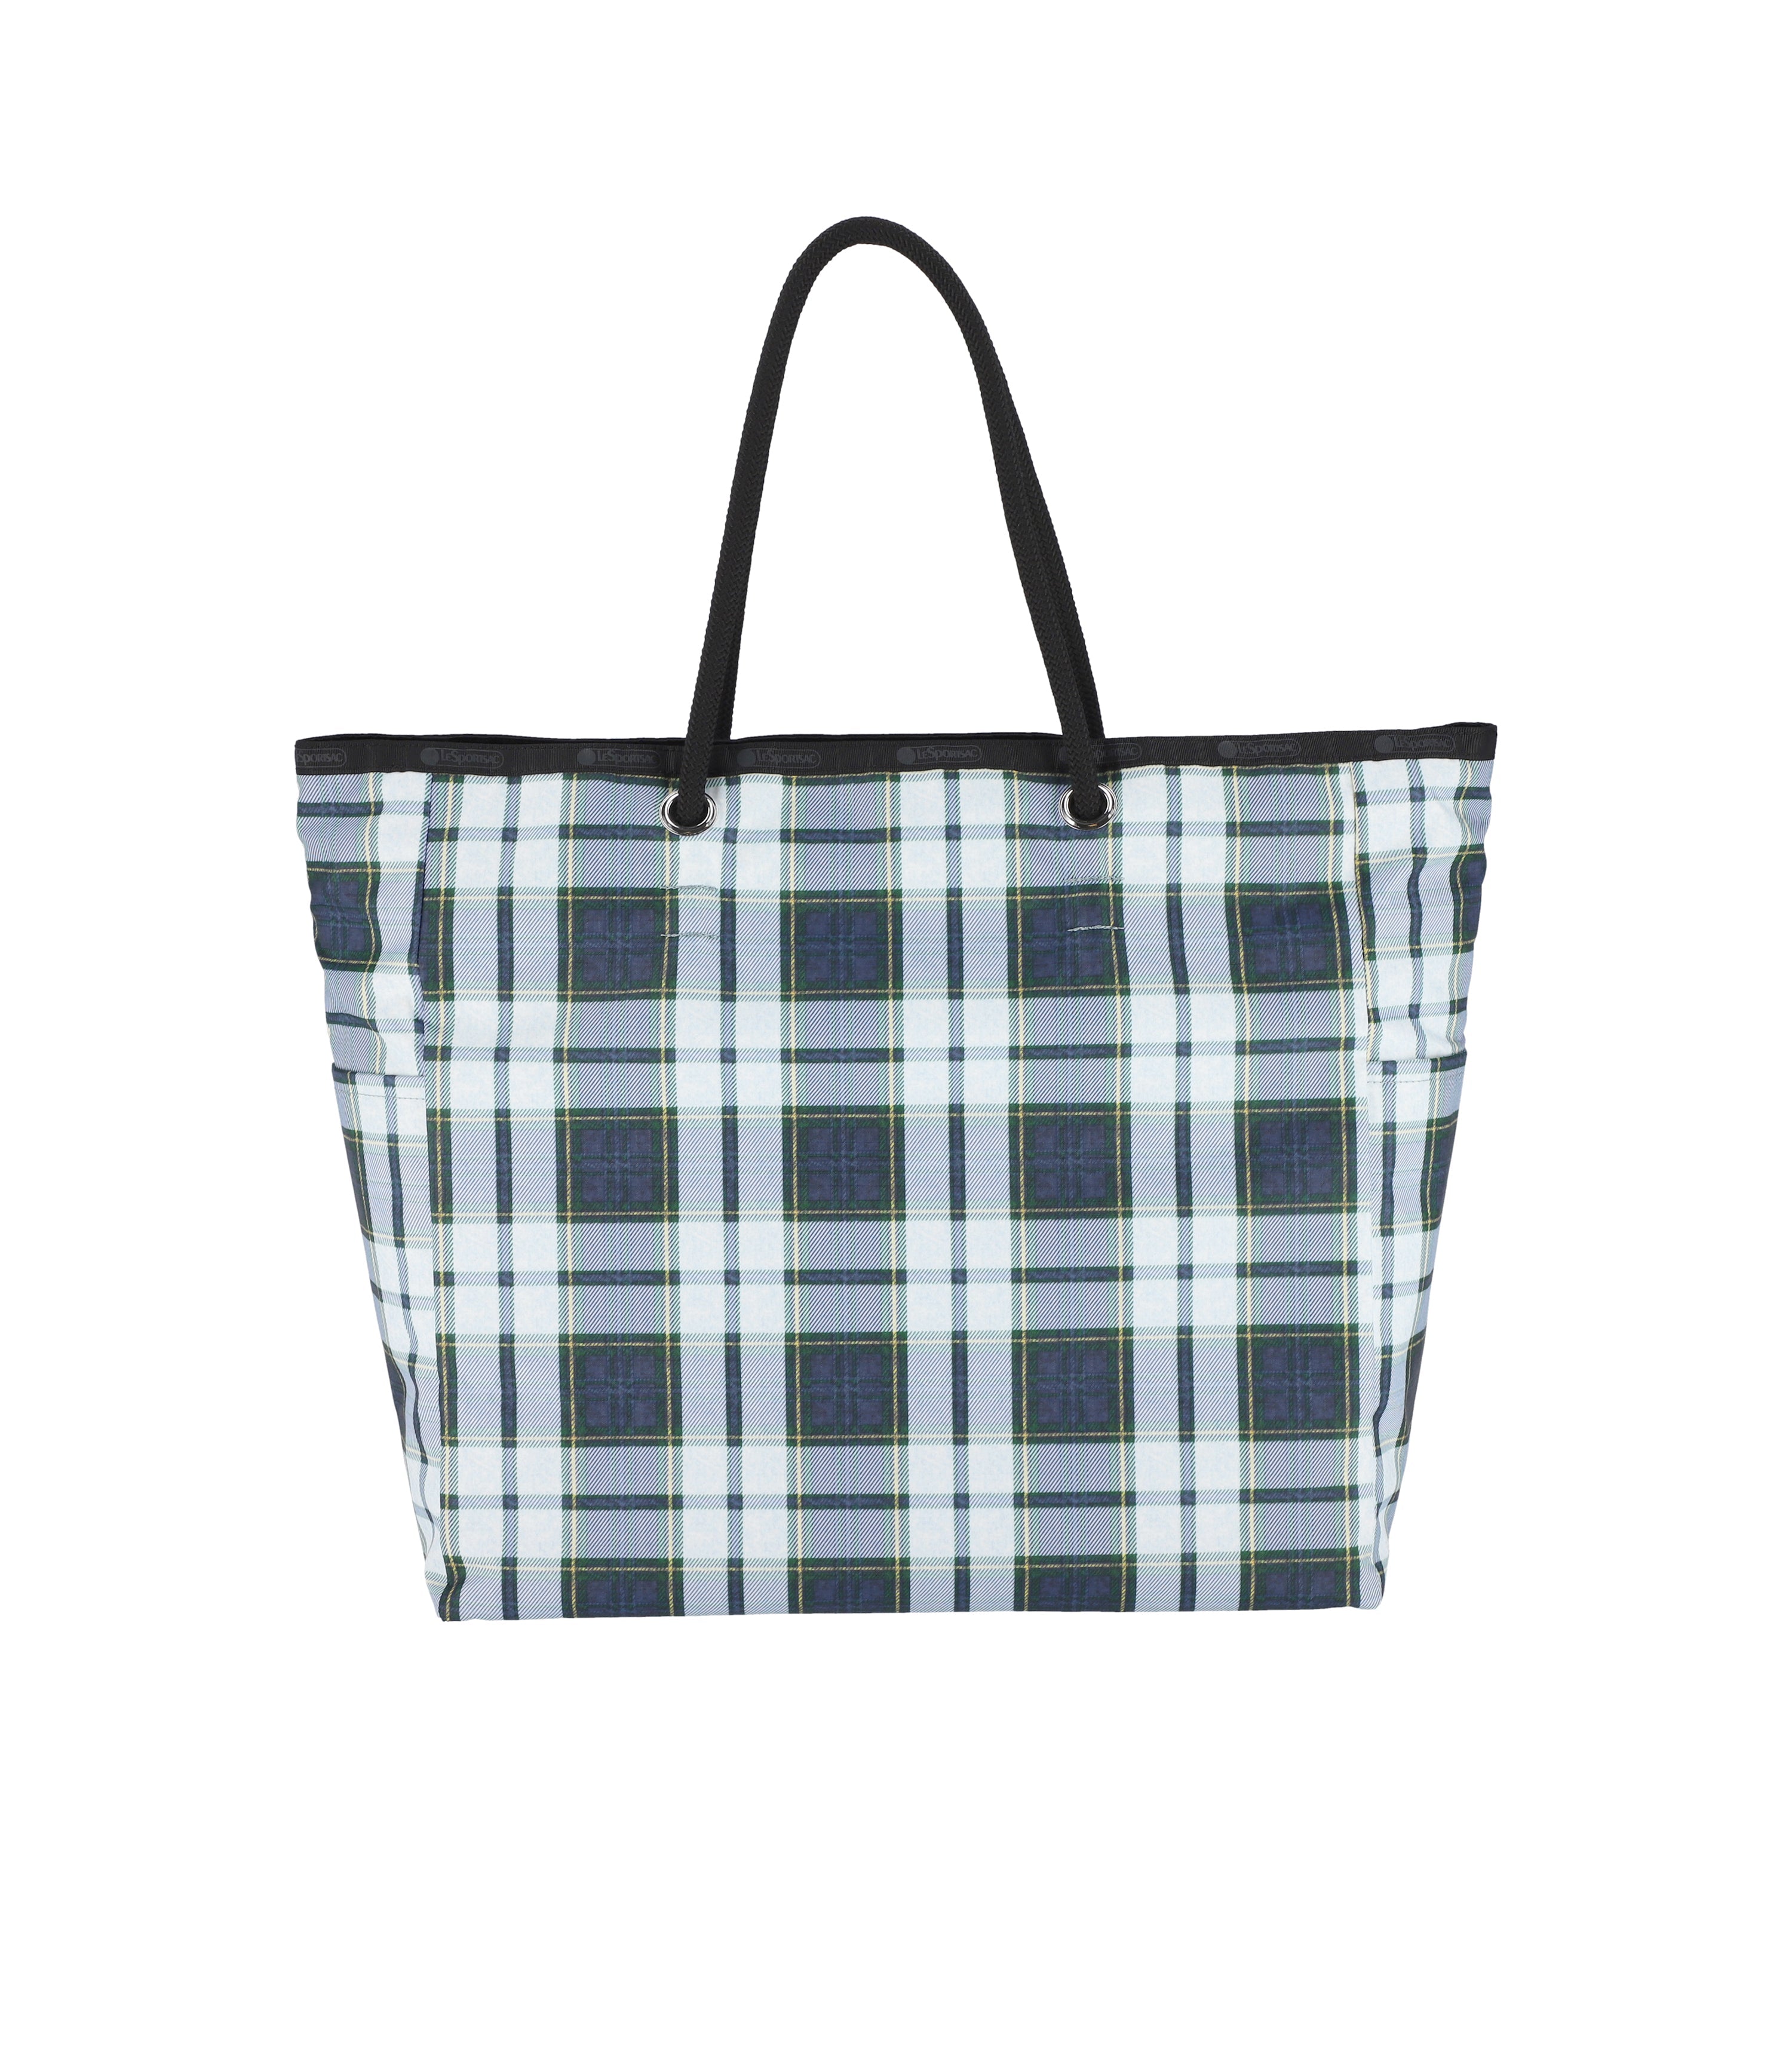 Béis 'The Work Tote' in Plaid - Small Work Bag & Laptop Bag